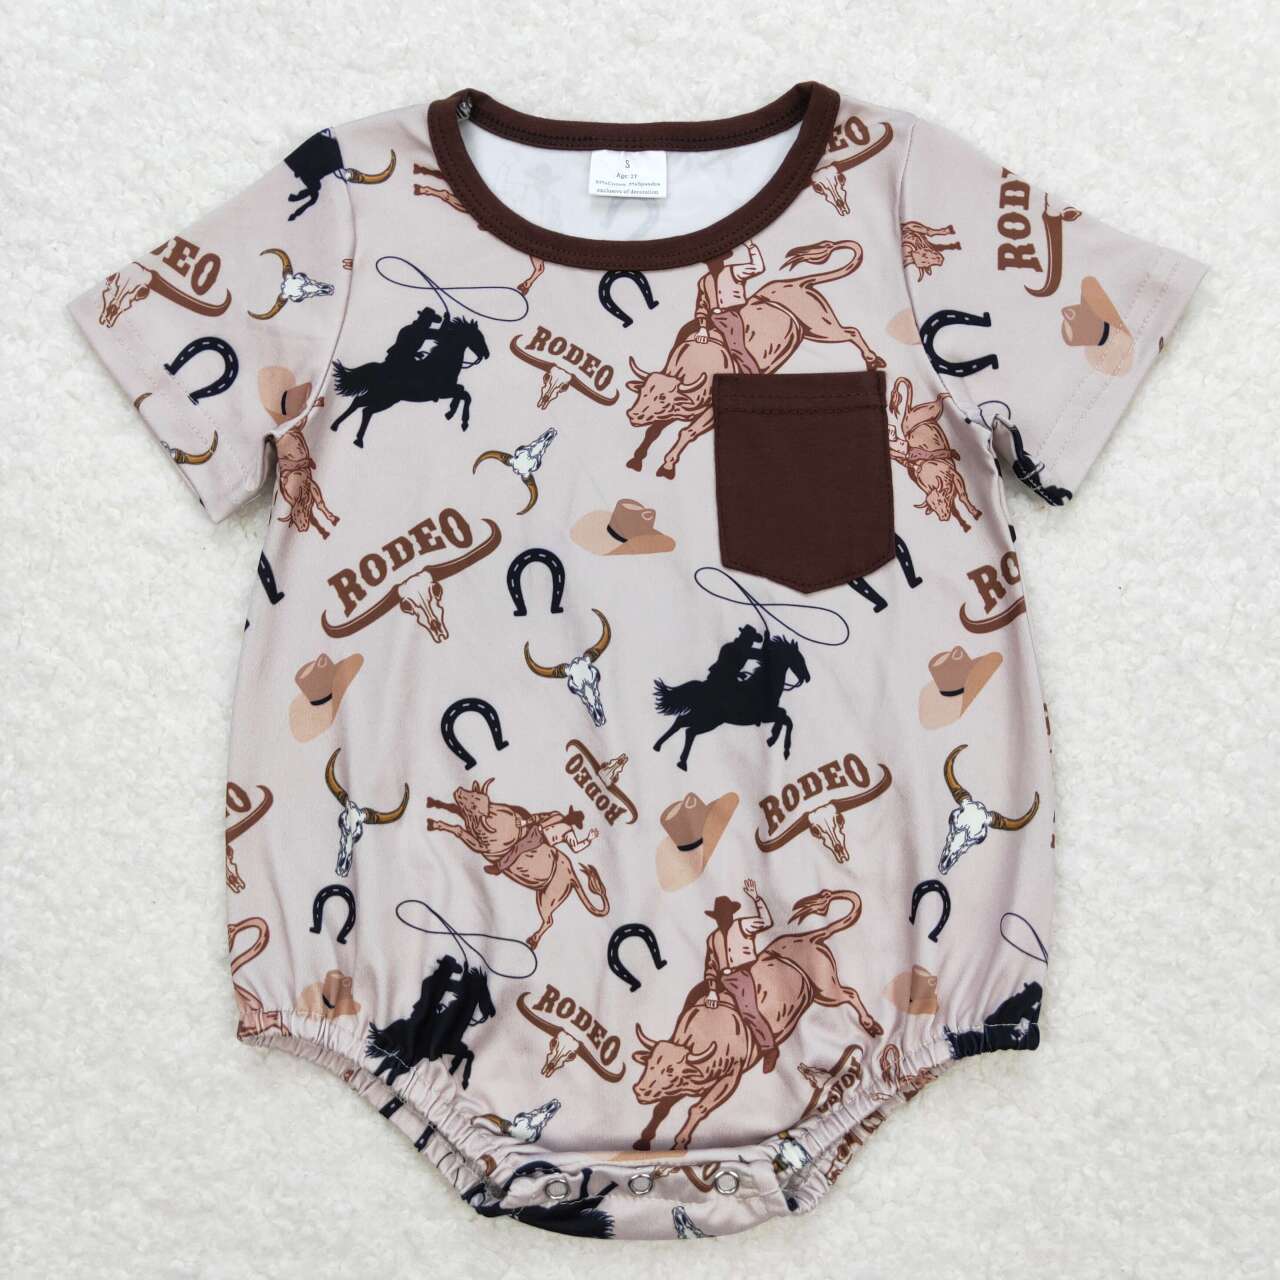 Rodeo Print Sibling Summer Western Matching Clothes